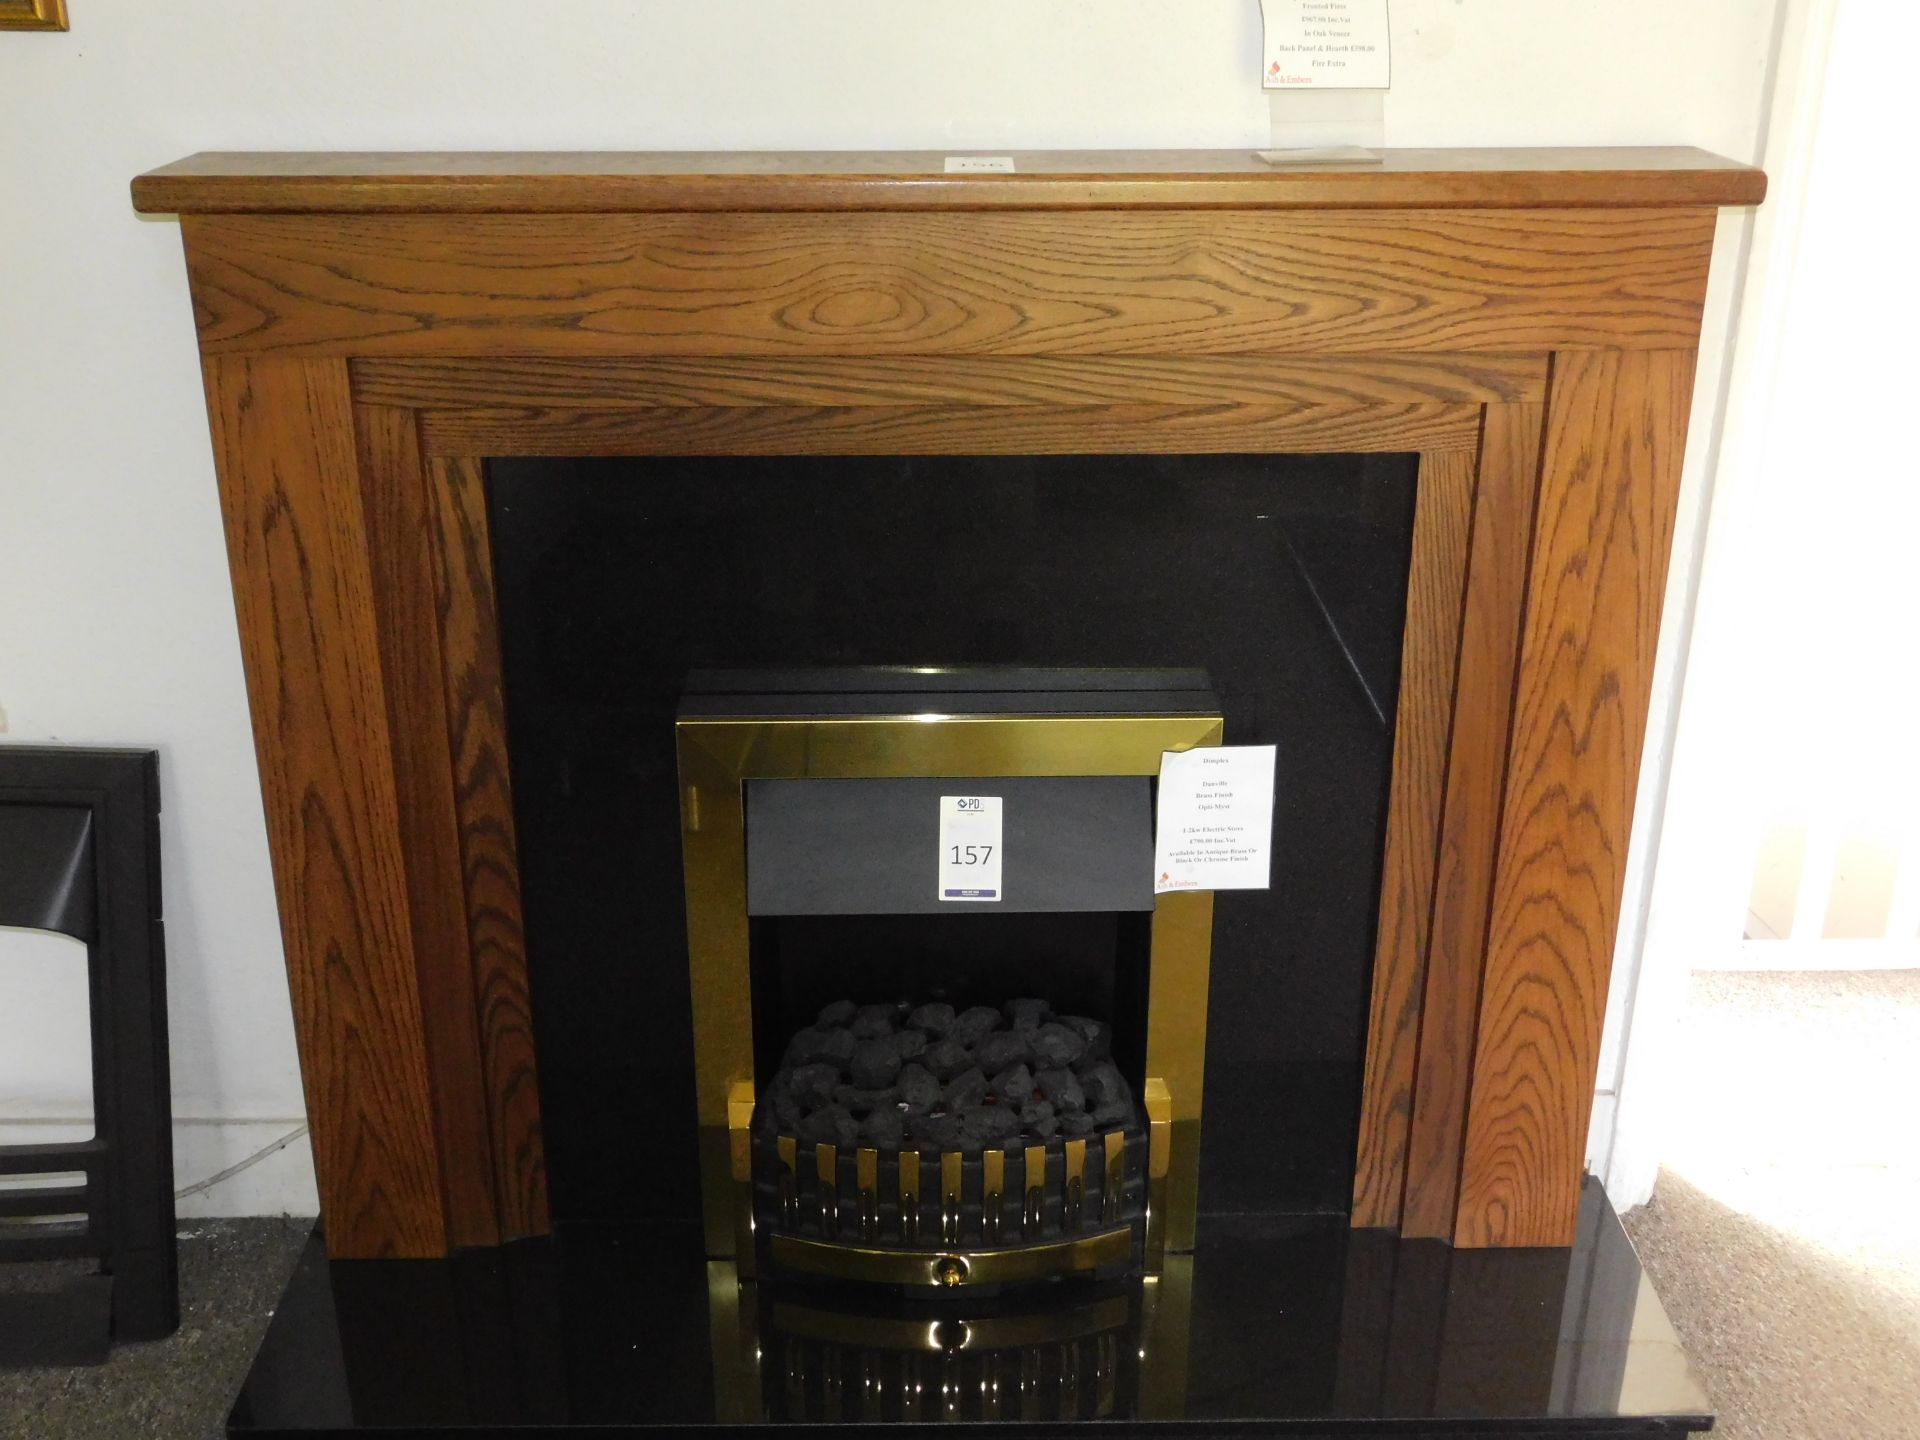 Ex-Display GB Mantels “Earsldon” Walnut Polished Oak Fireplace Surround with Back & Hearth (Excludes